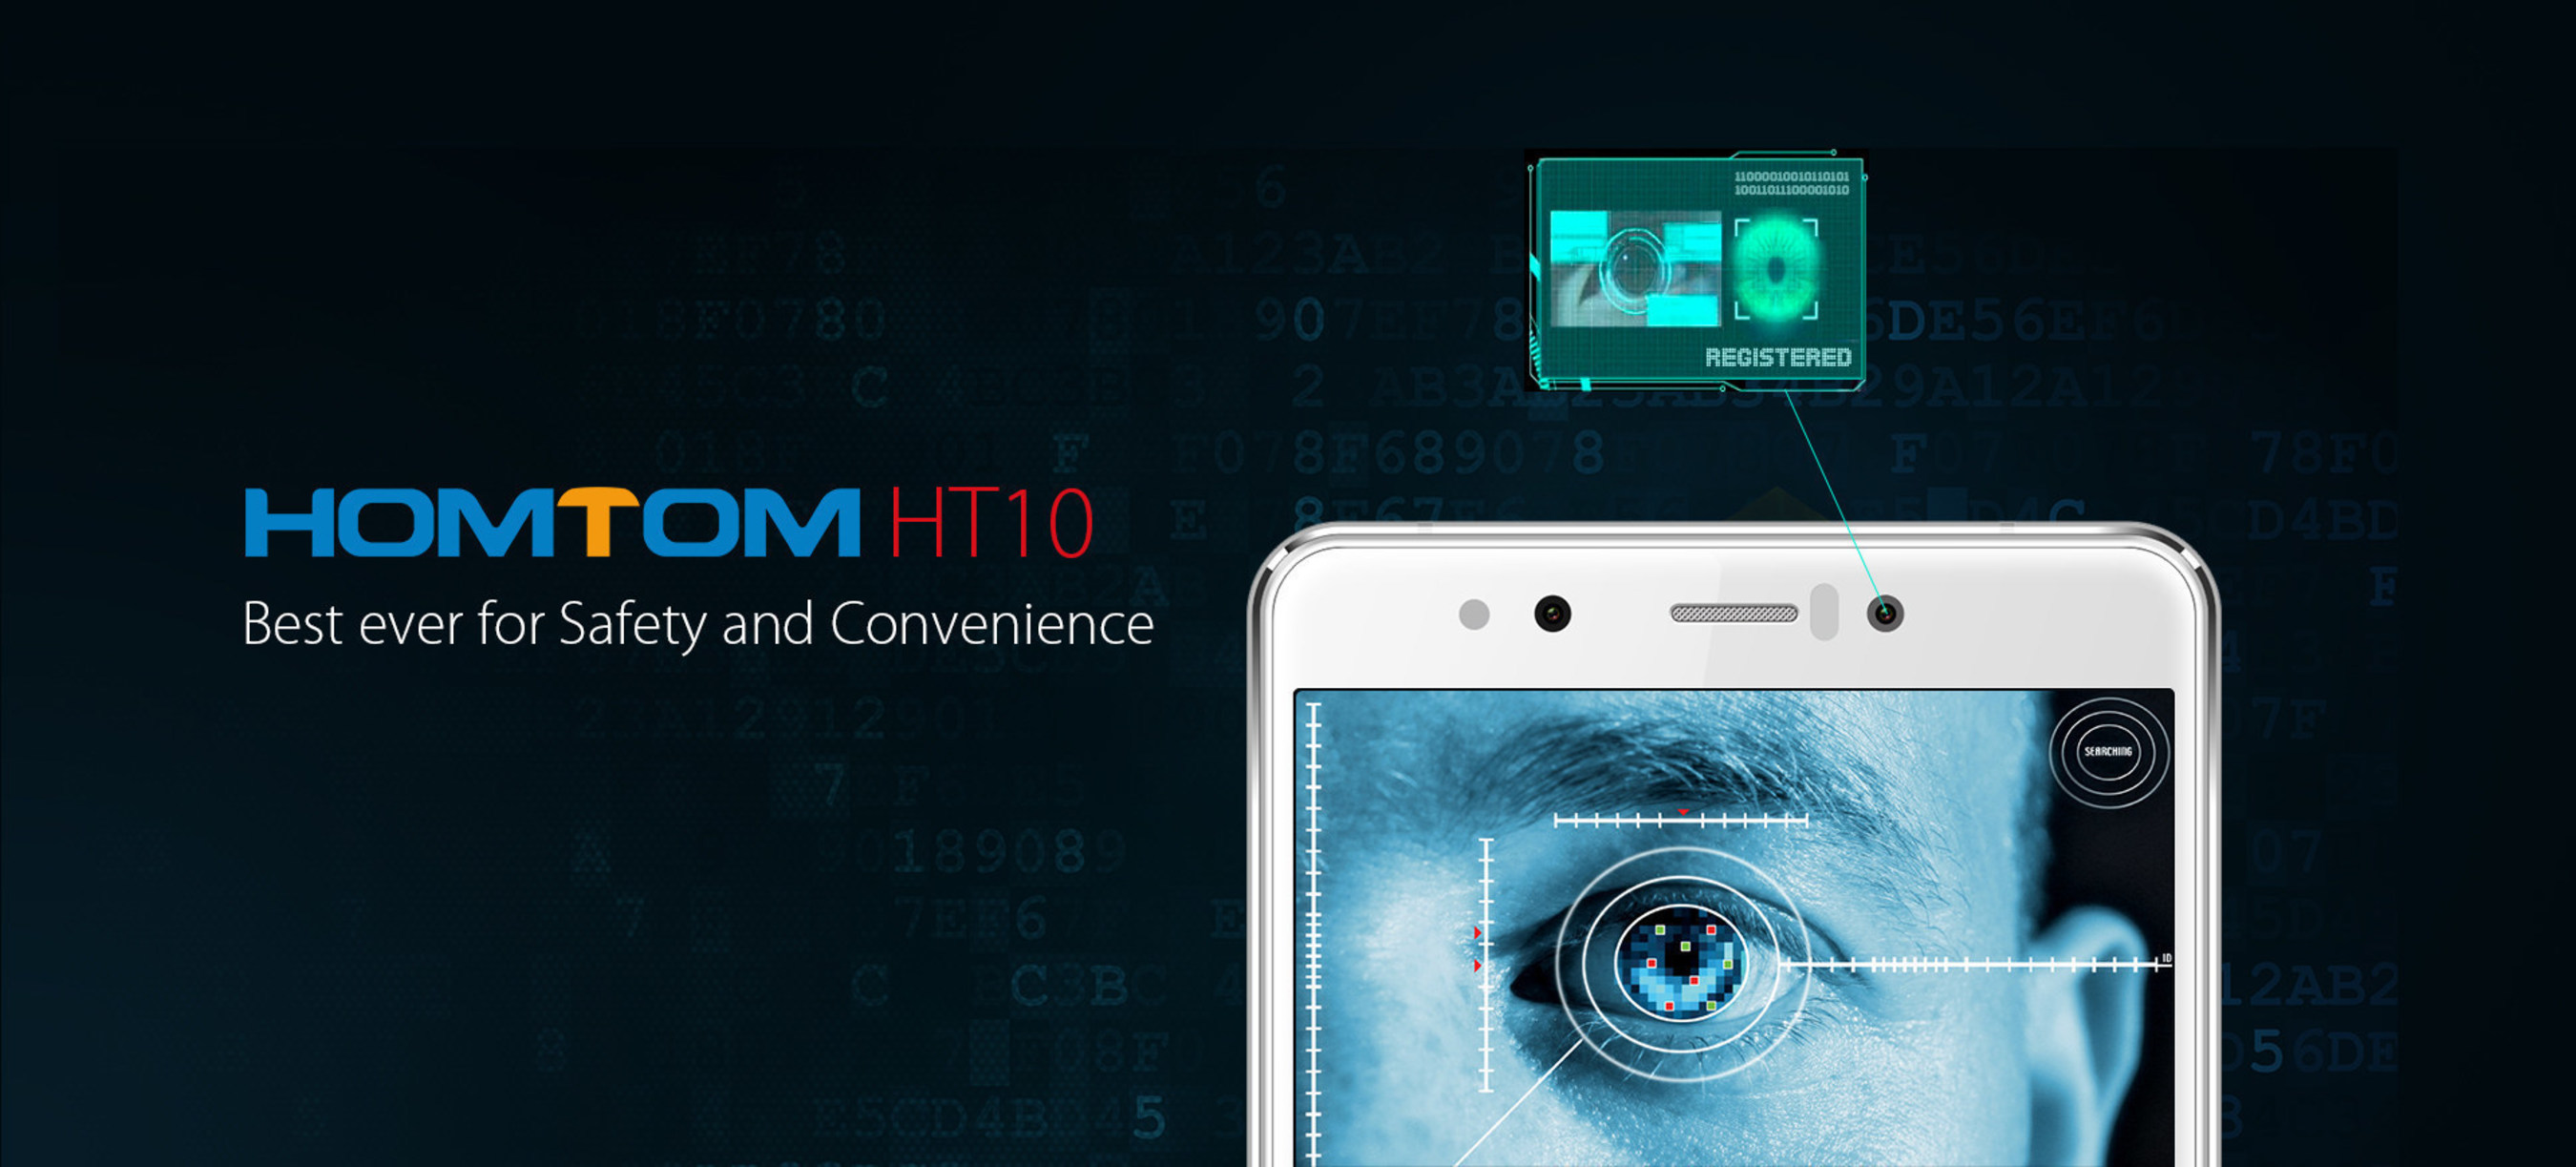 Advanced iris recognition technology makes the HOMTOM HT10 one of the most secure smartphones available on the market